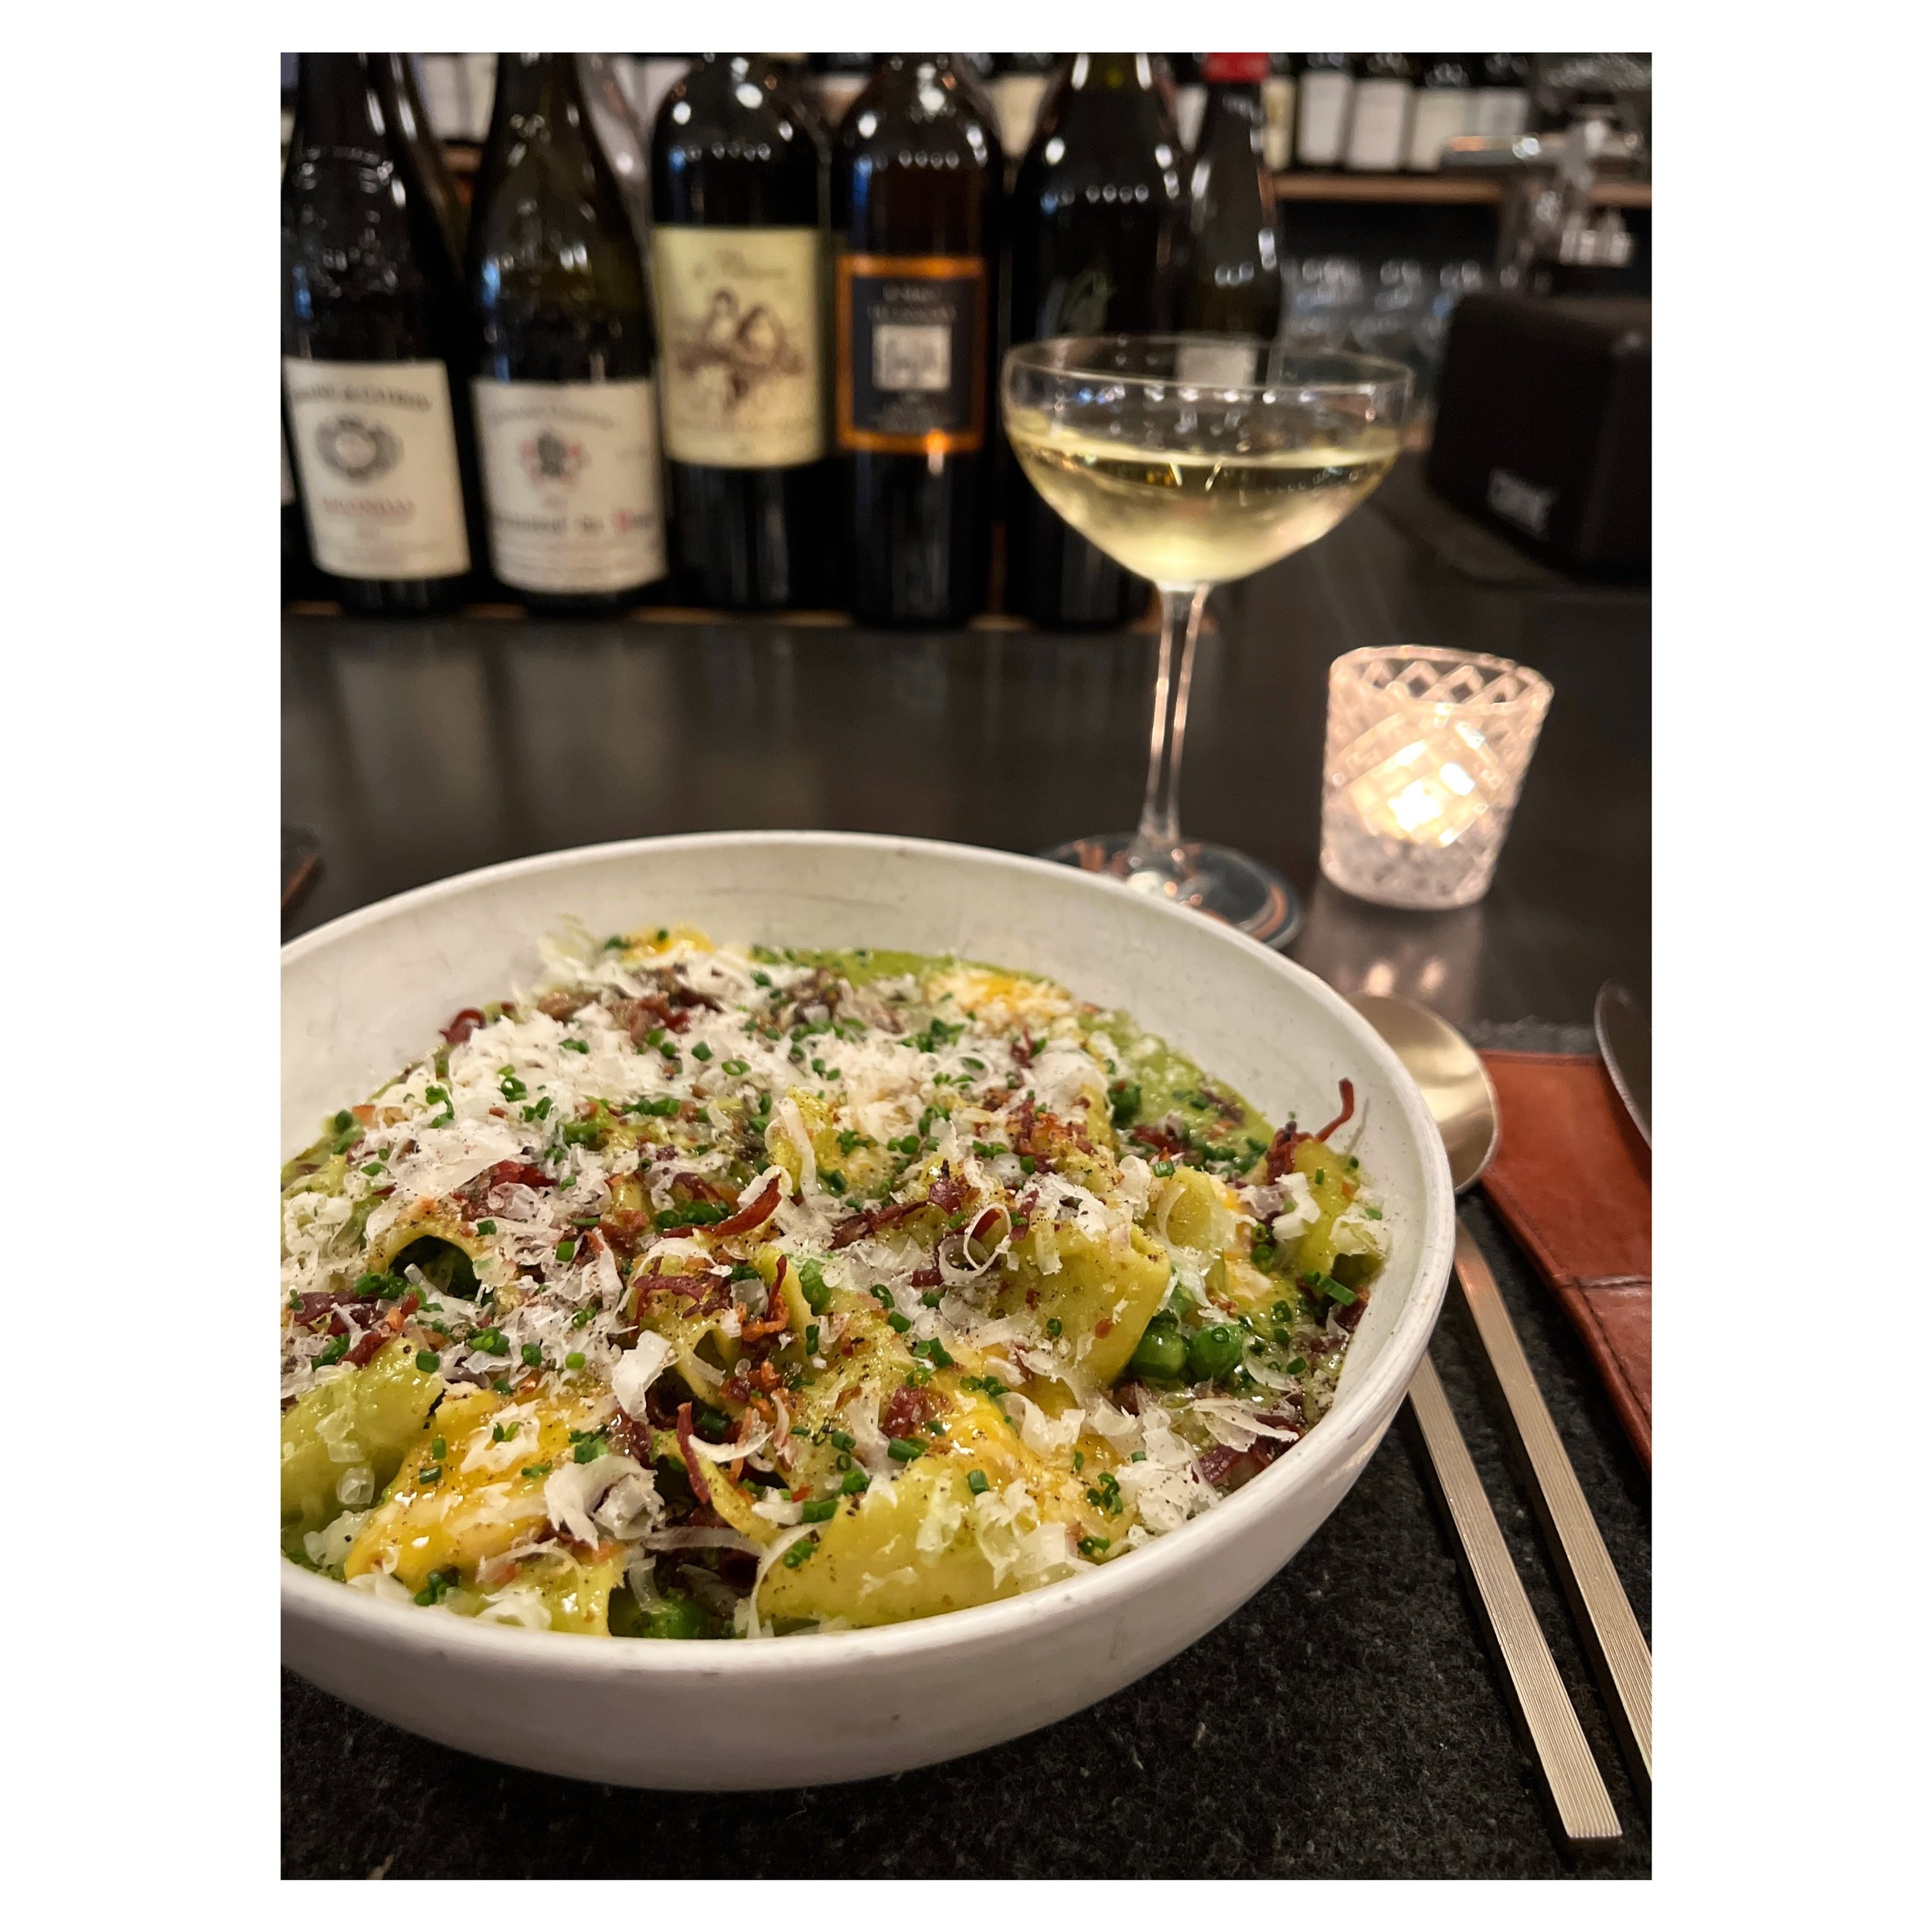 We&rsquo;re open from 2pm on Saturdays for bar snacks and drinks and from 5pm for dinner. Since spring decided not to show up today, we recommend remedying the gloom with a hearty bowl of our confit duck pasta with ramp butter, fresh peas, crispy spe